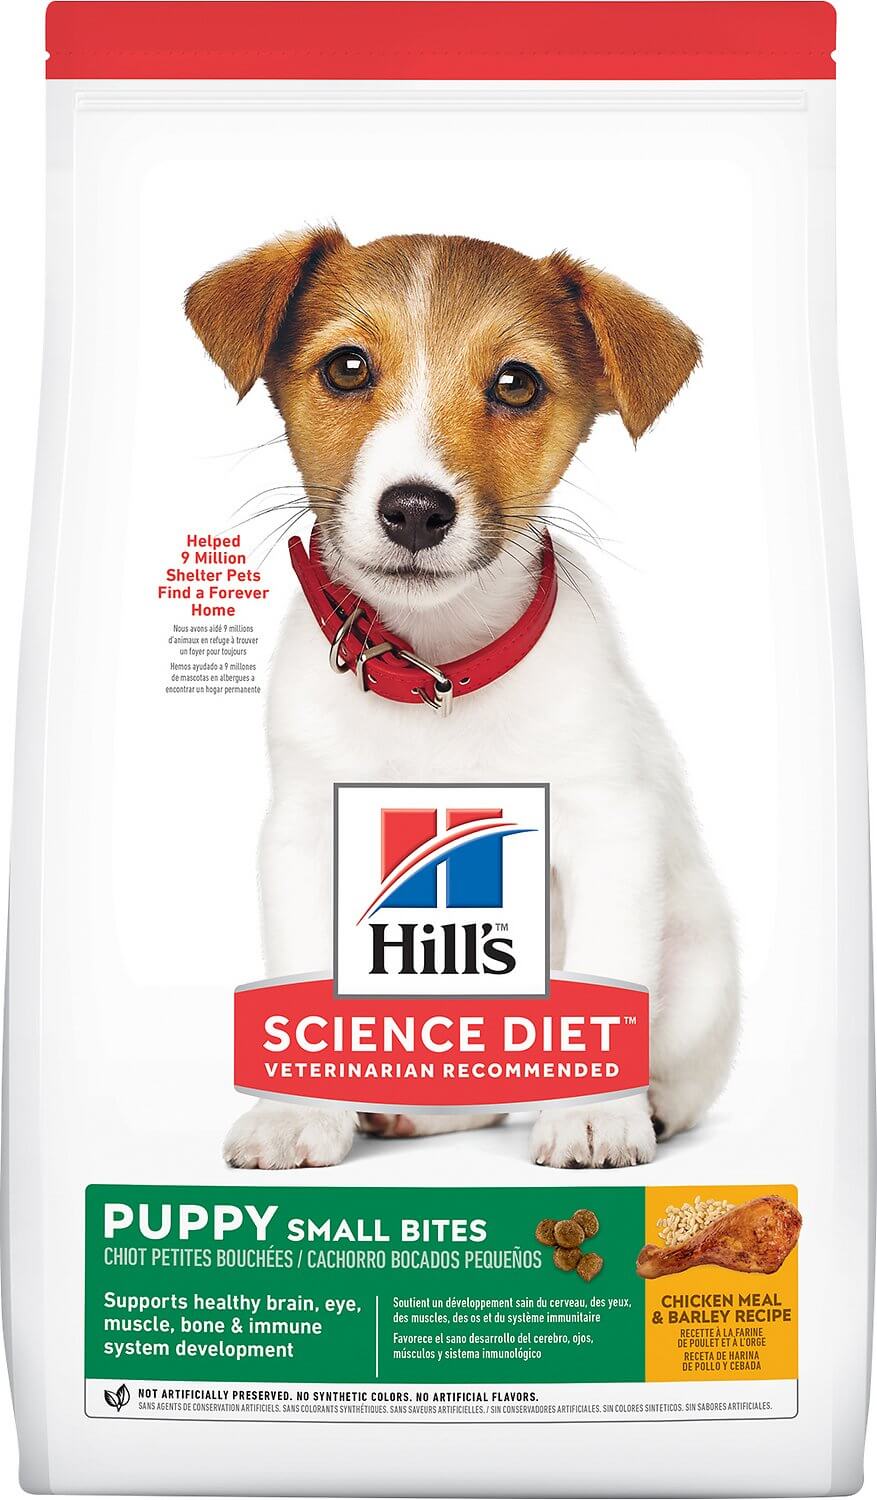 science diet sensitive stomach small breed